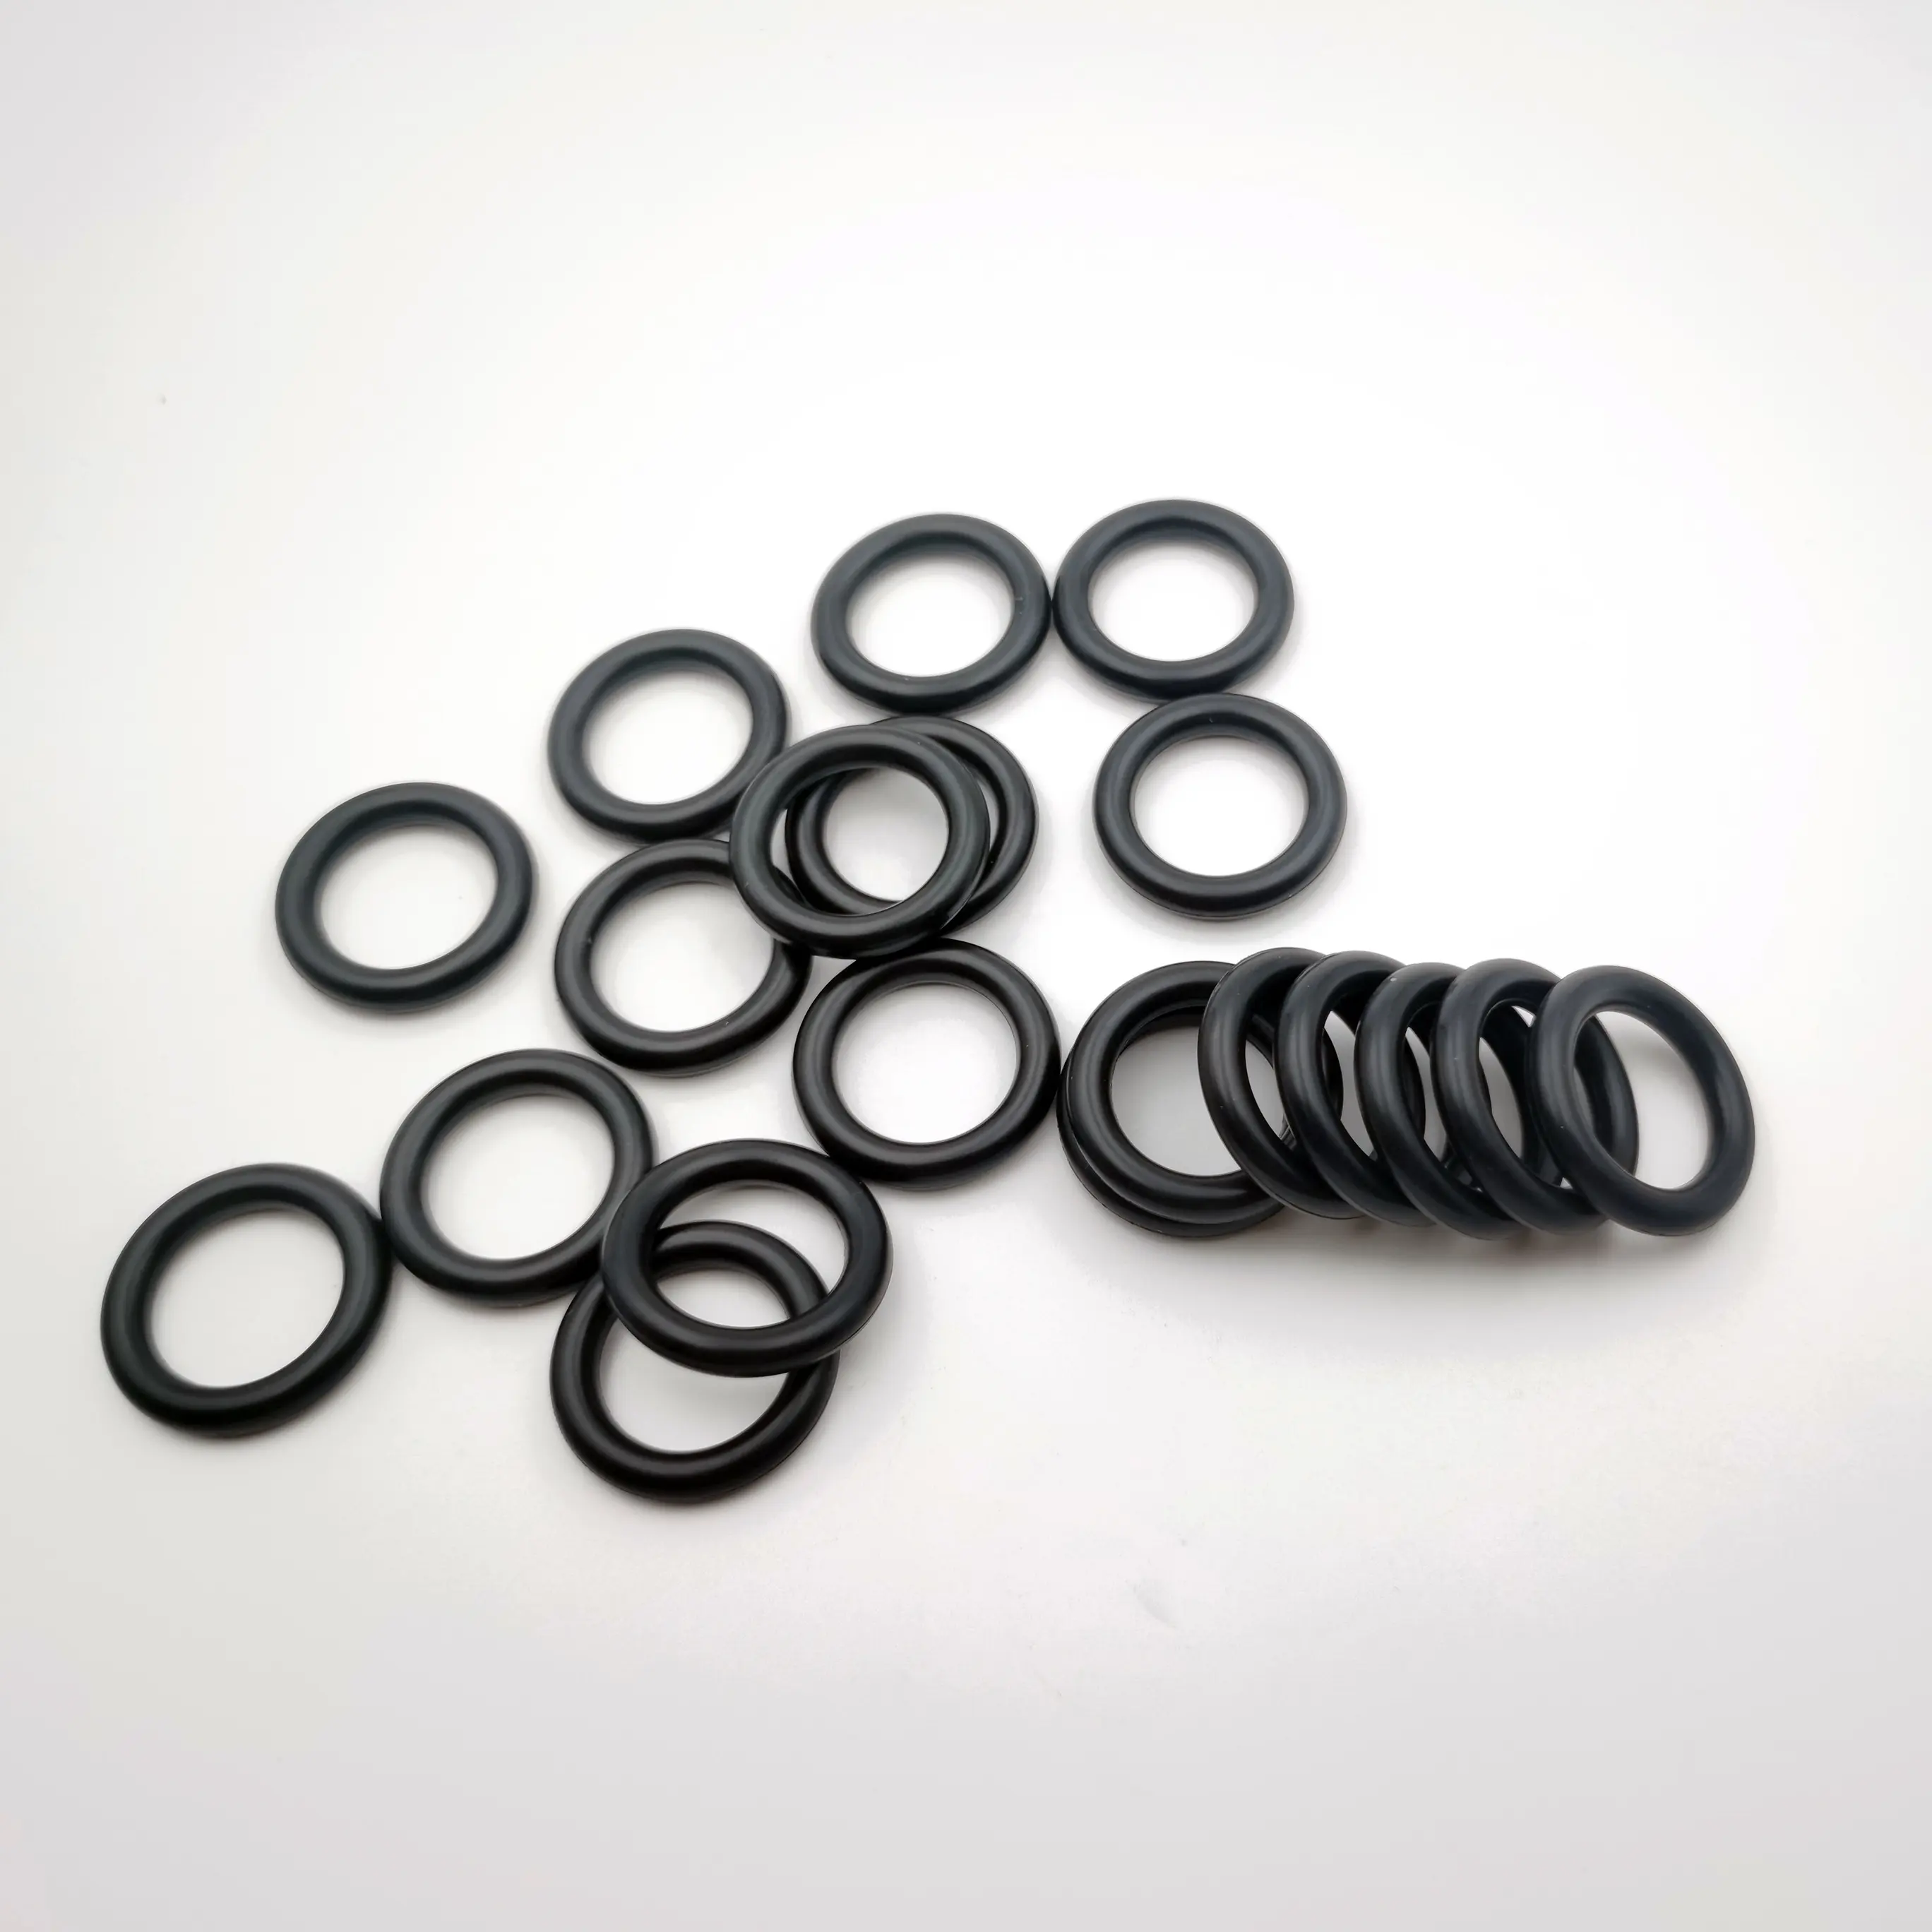 Various rubber non-standard sealing rings such as nitrile high-quality rubber O-ring